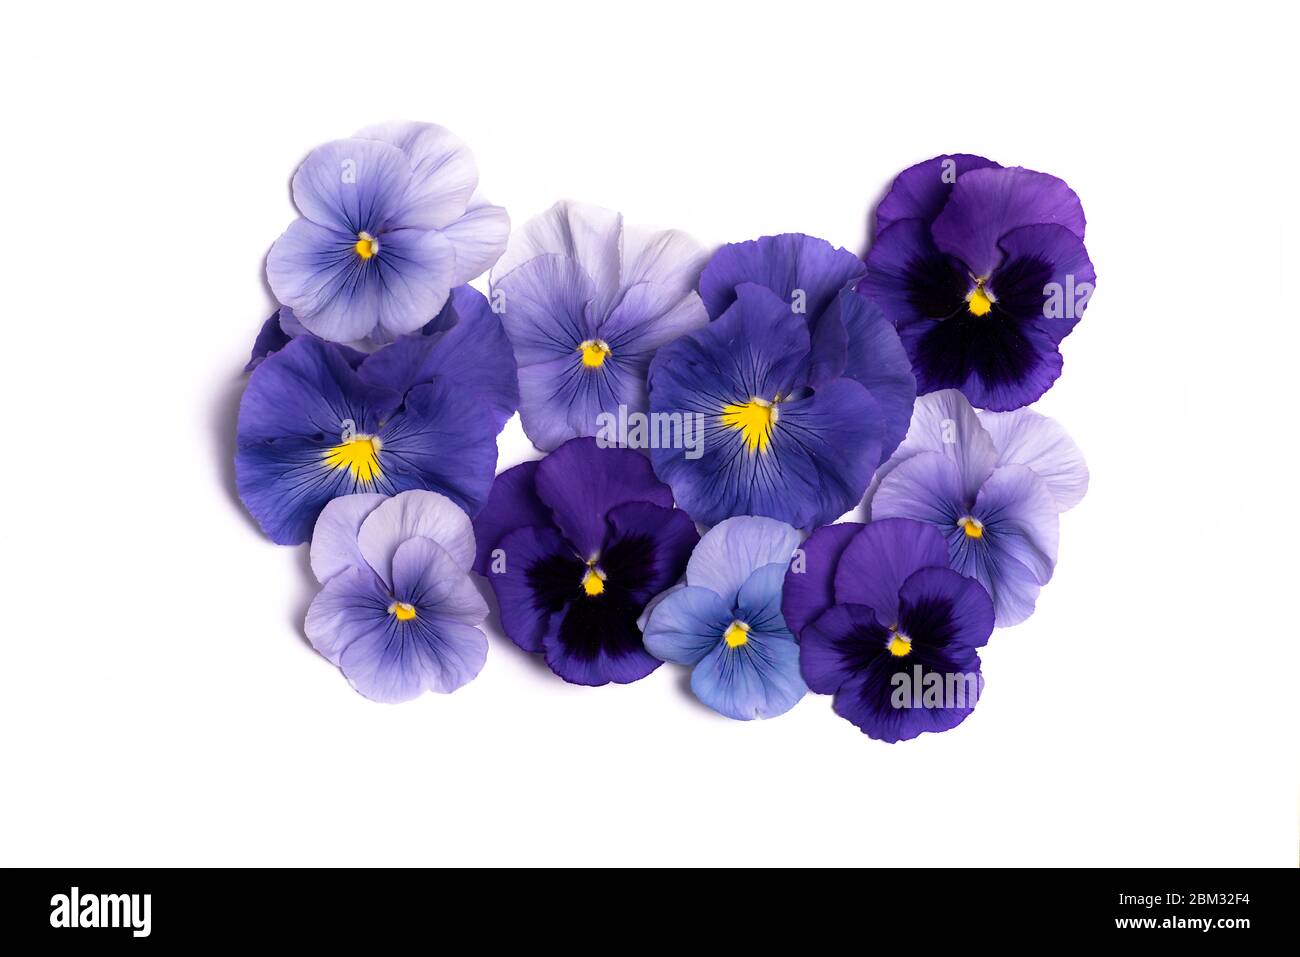 Viola plant violet flower in blossom arrangement isolated with copy space Stock Photo